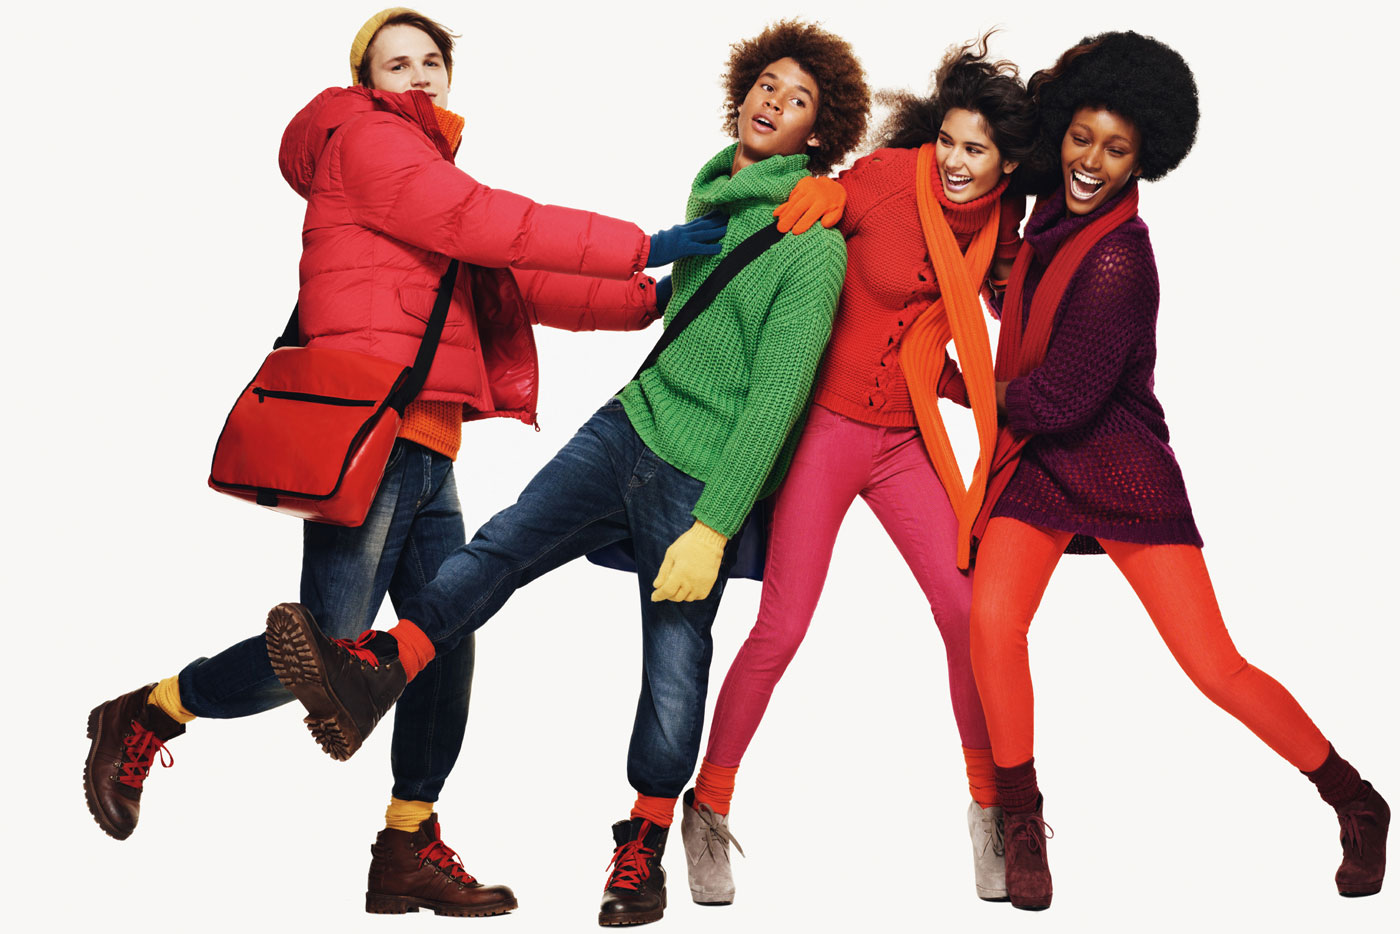 United Colors of Benetton by Josh Olins